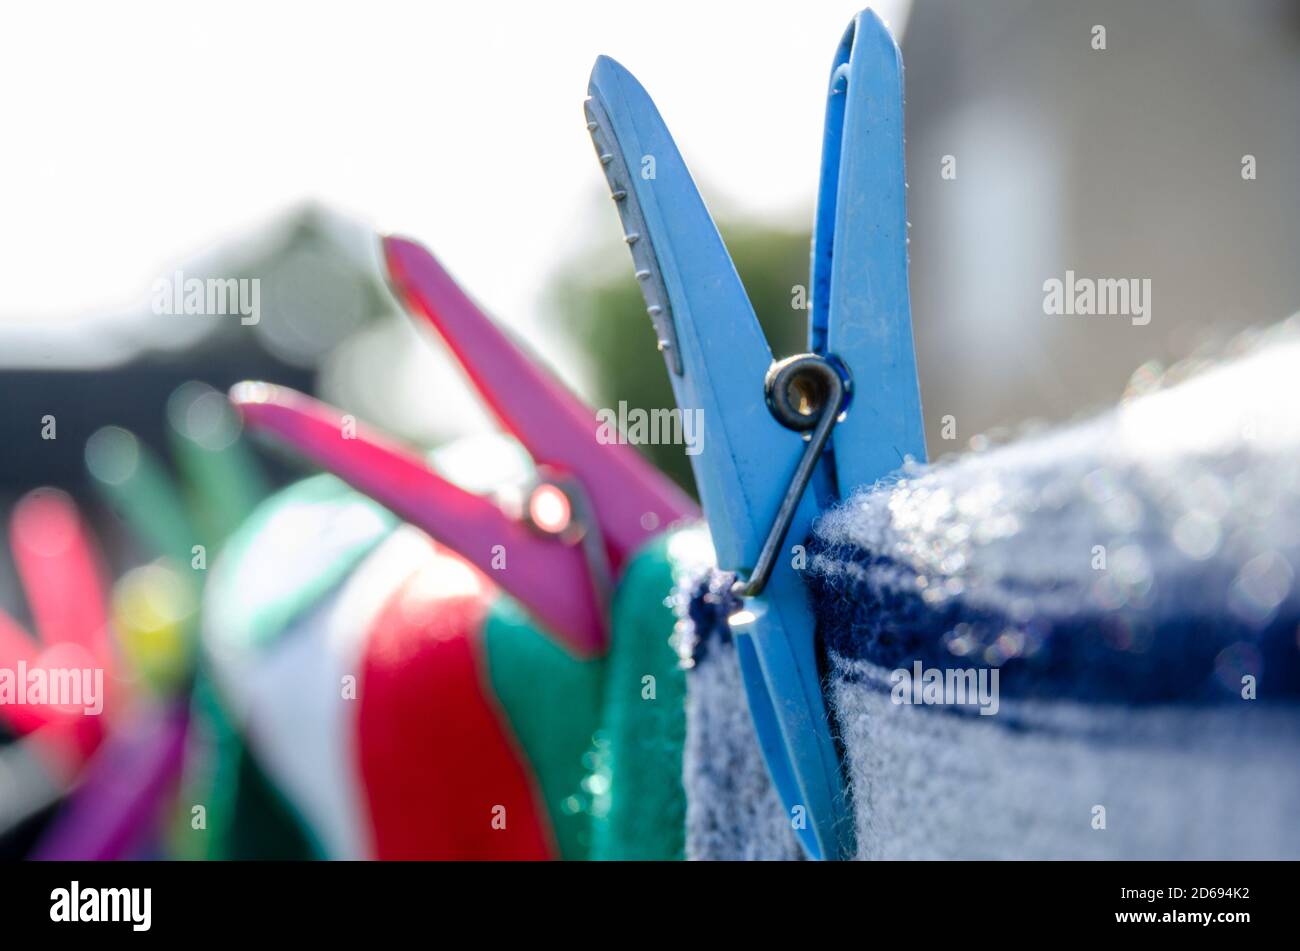 Close up view of laundry pegged to a washing line in a garden with plastic clothes pegs to dry. Stock Photo